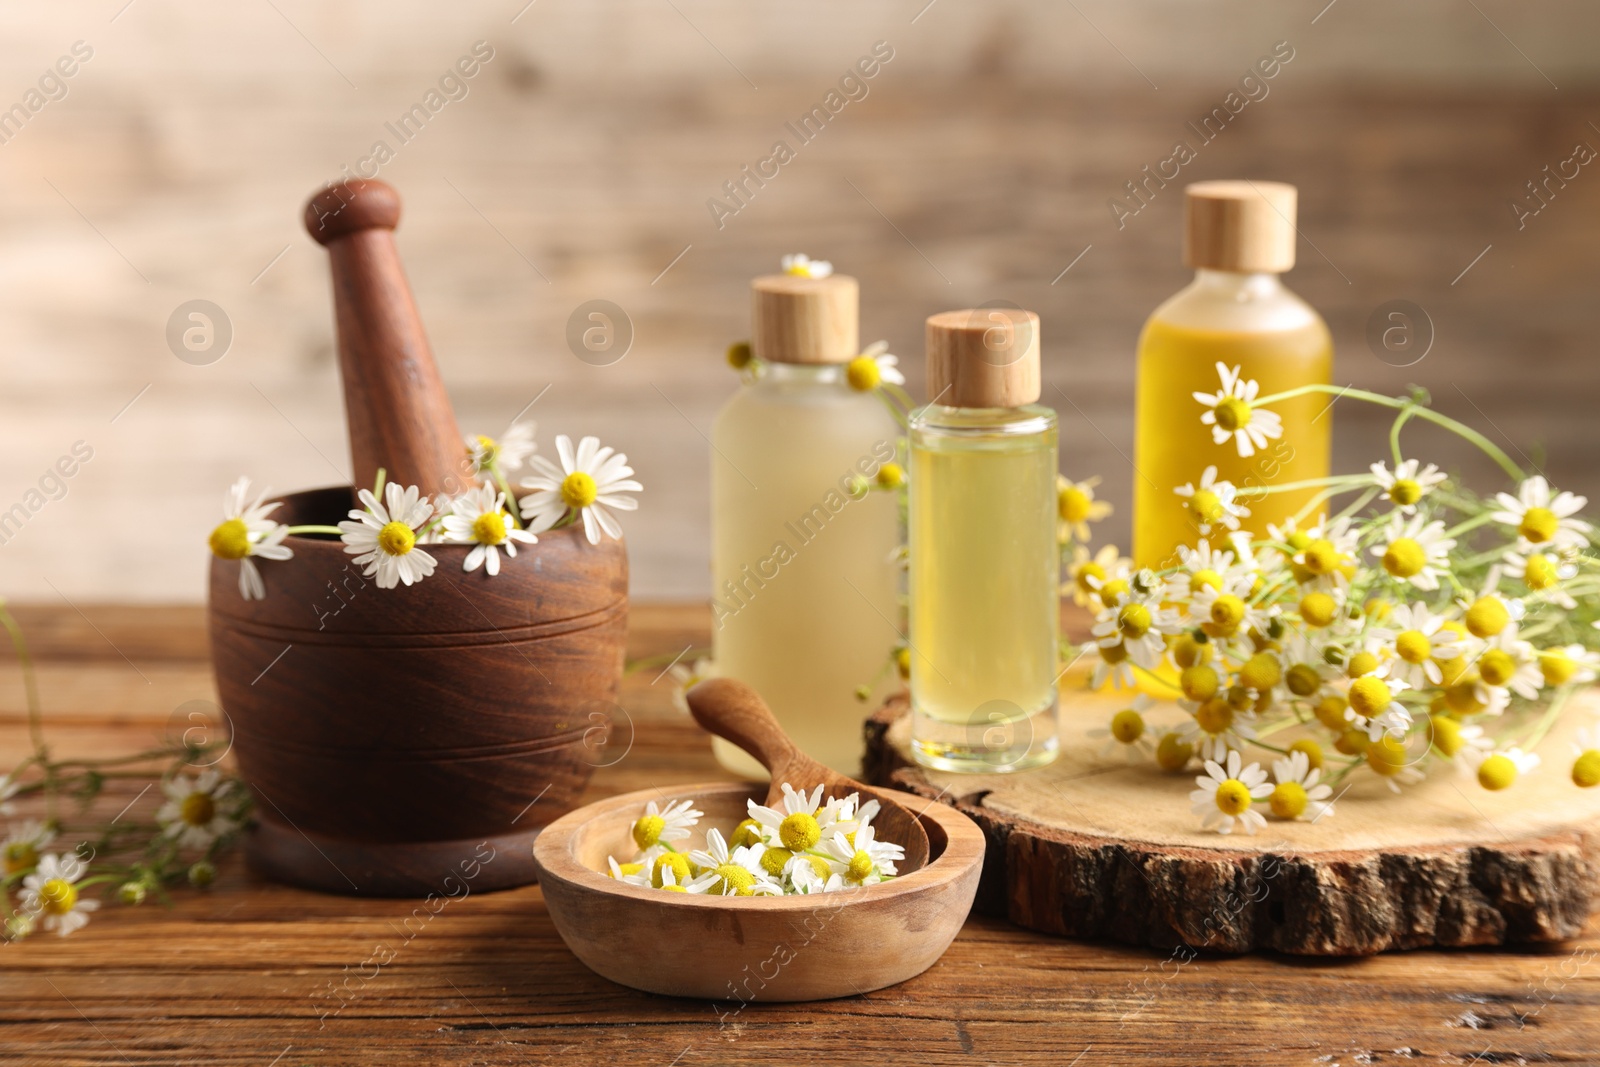 Photo of Different flowers and bottles of essential oils on wooden table